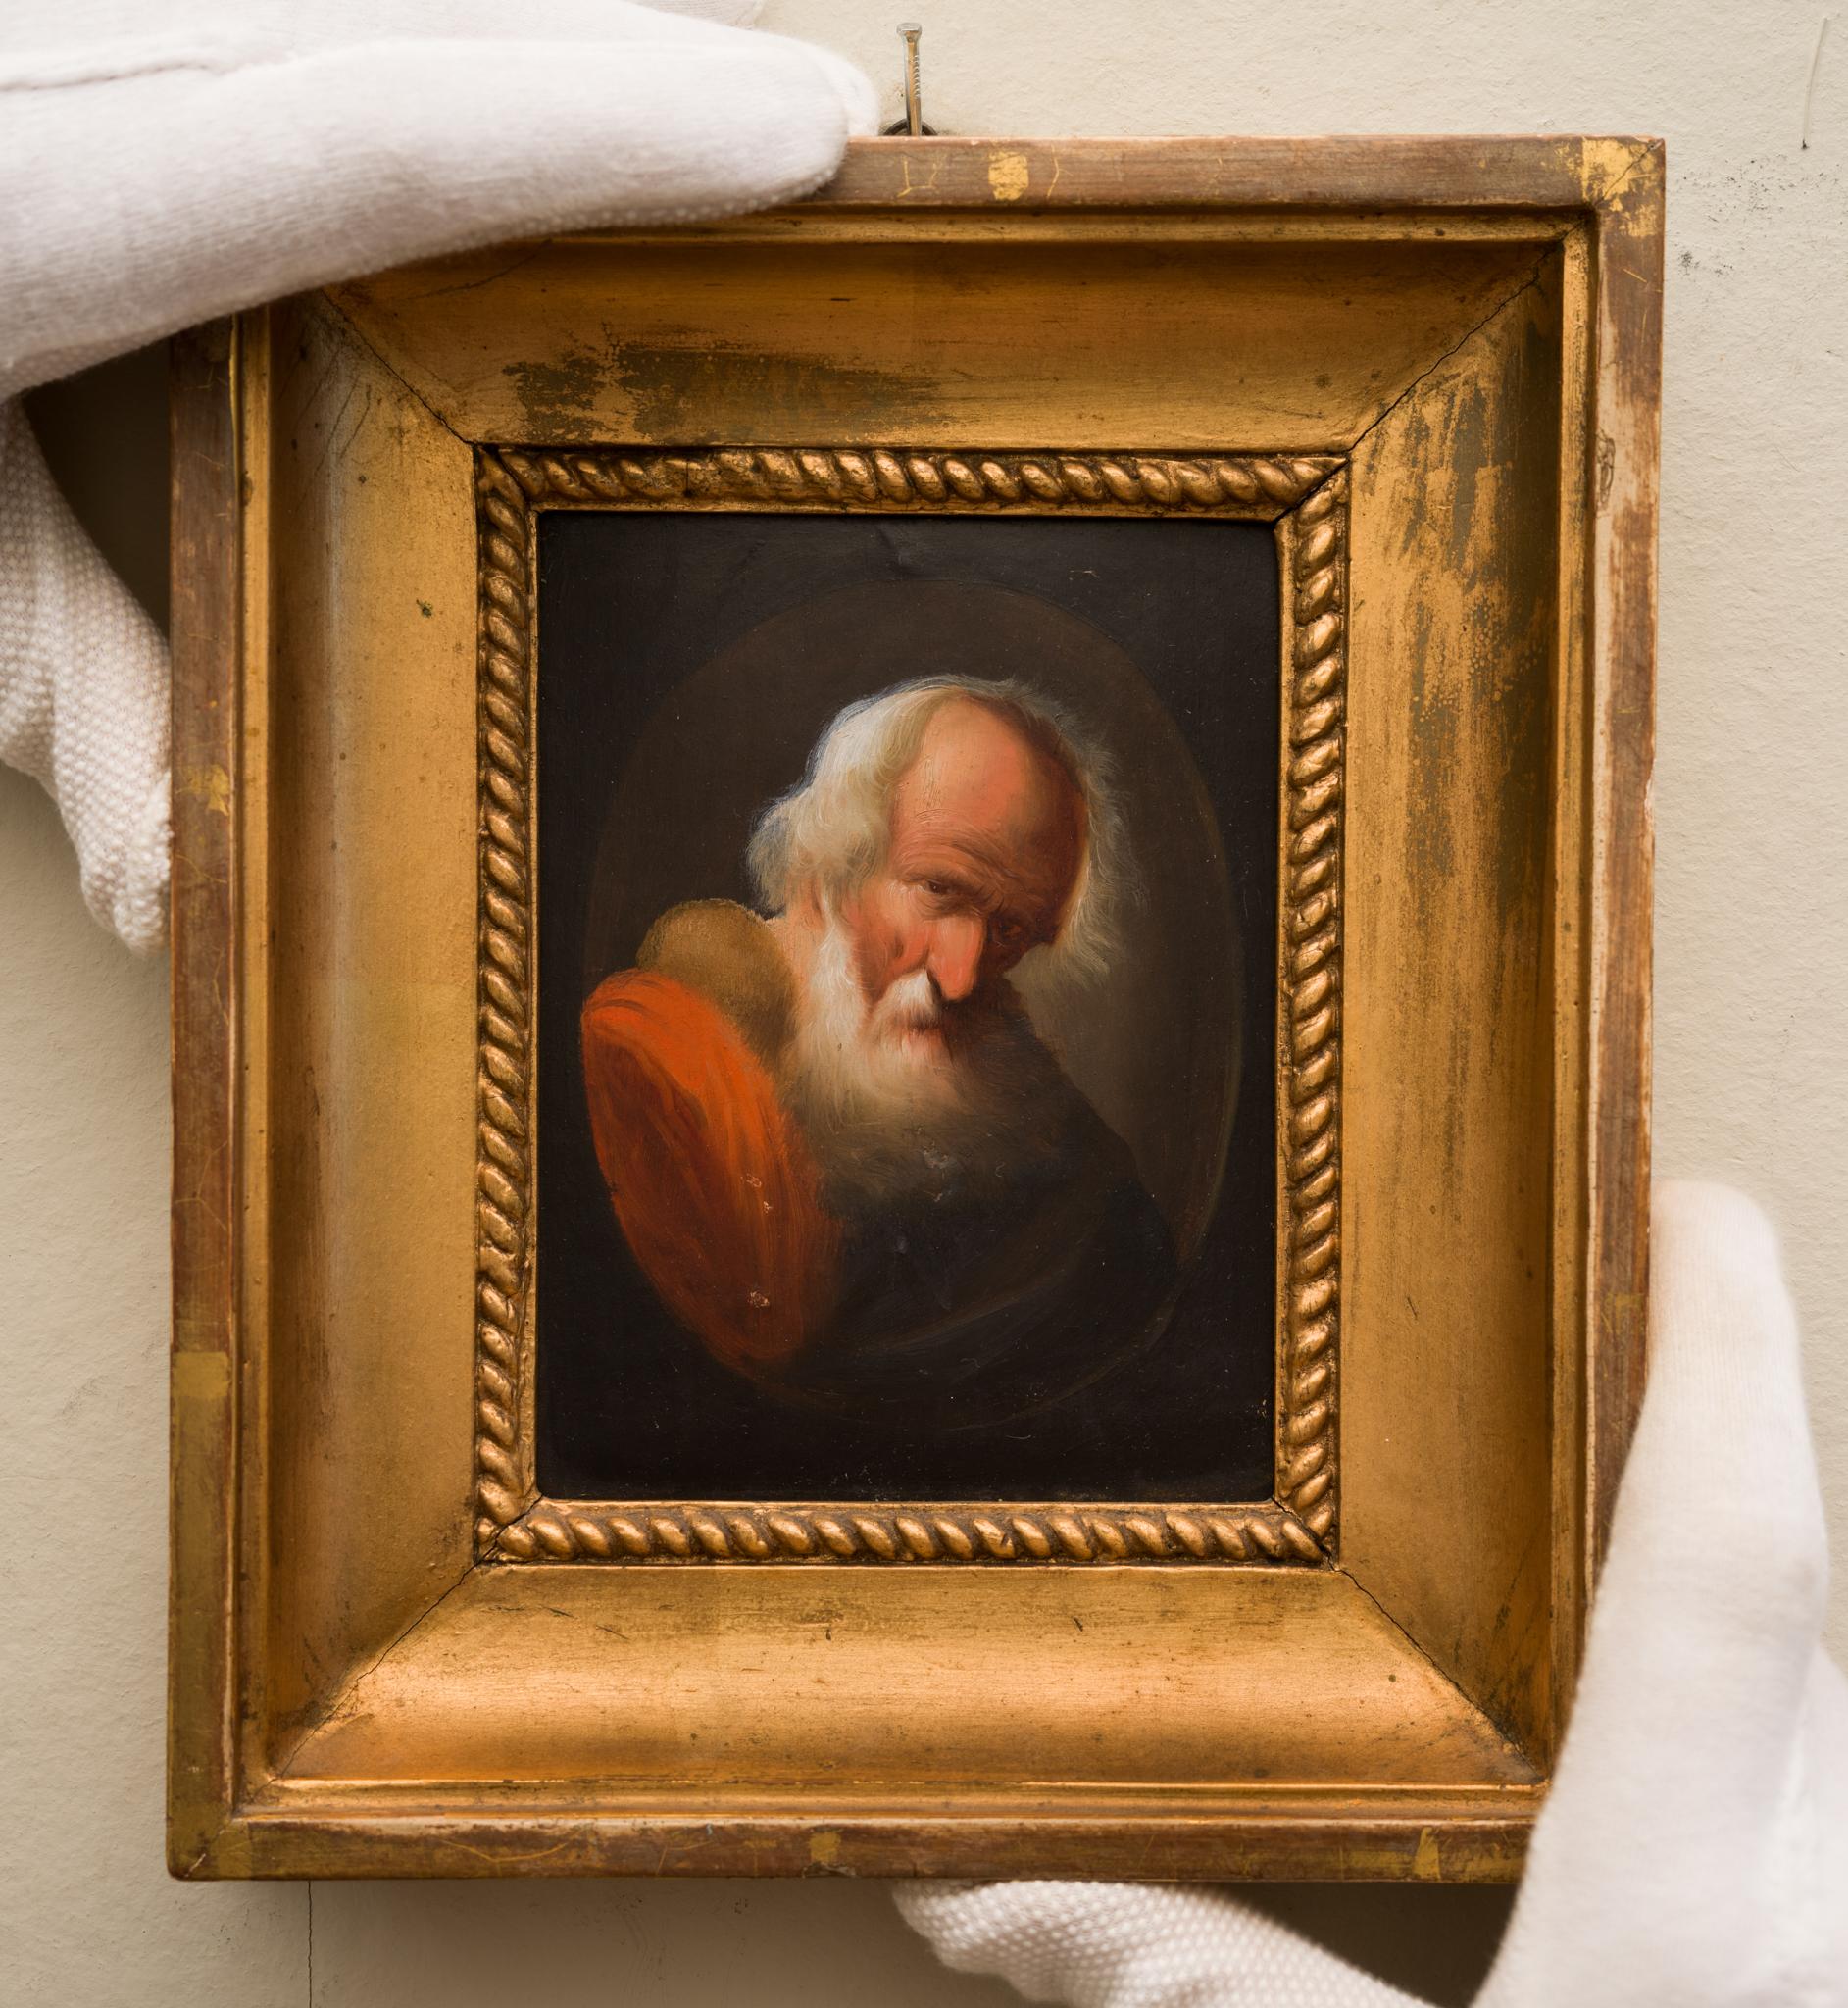 Portrait of an Old Man. Gold Frame Included - Painting by Christian Wilhelm Ernst Dietrich